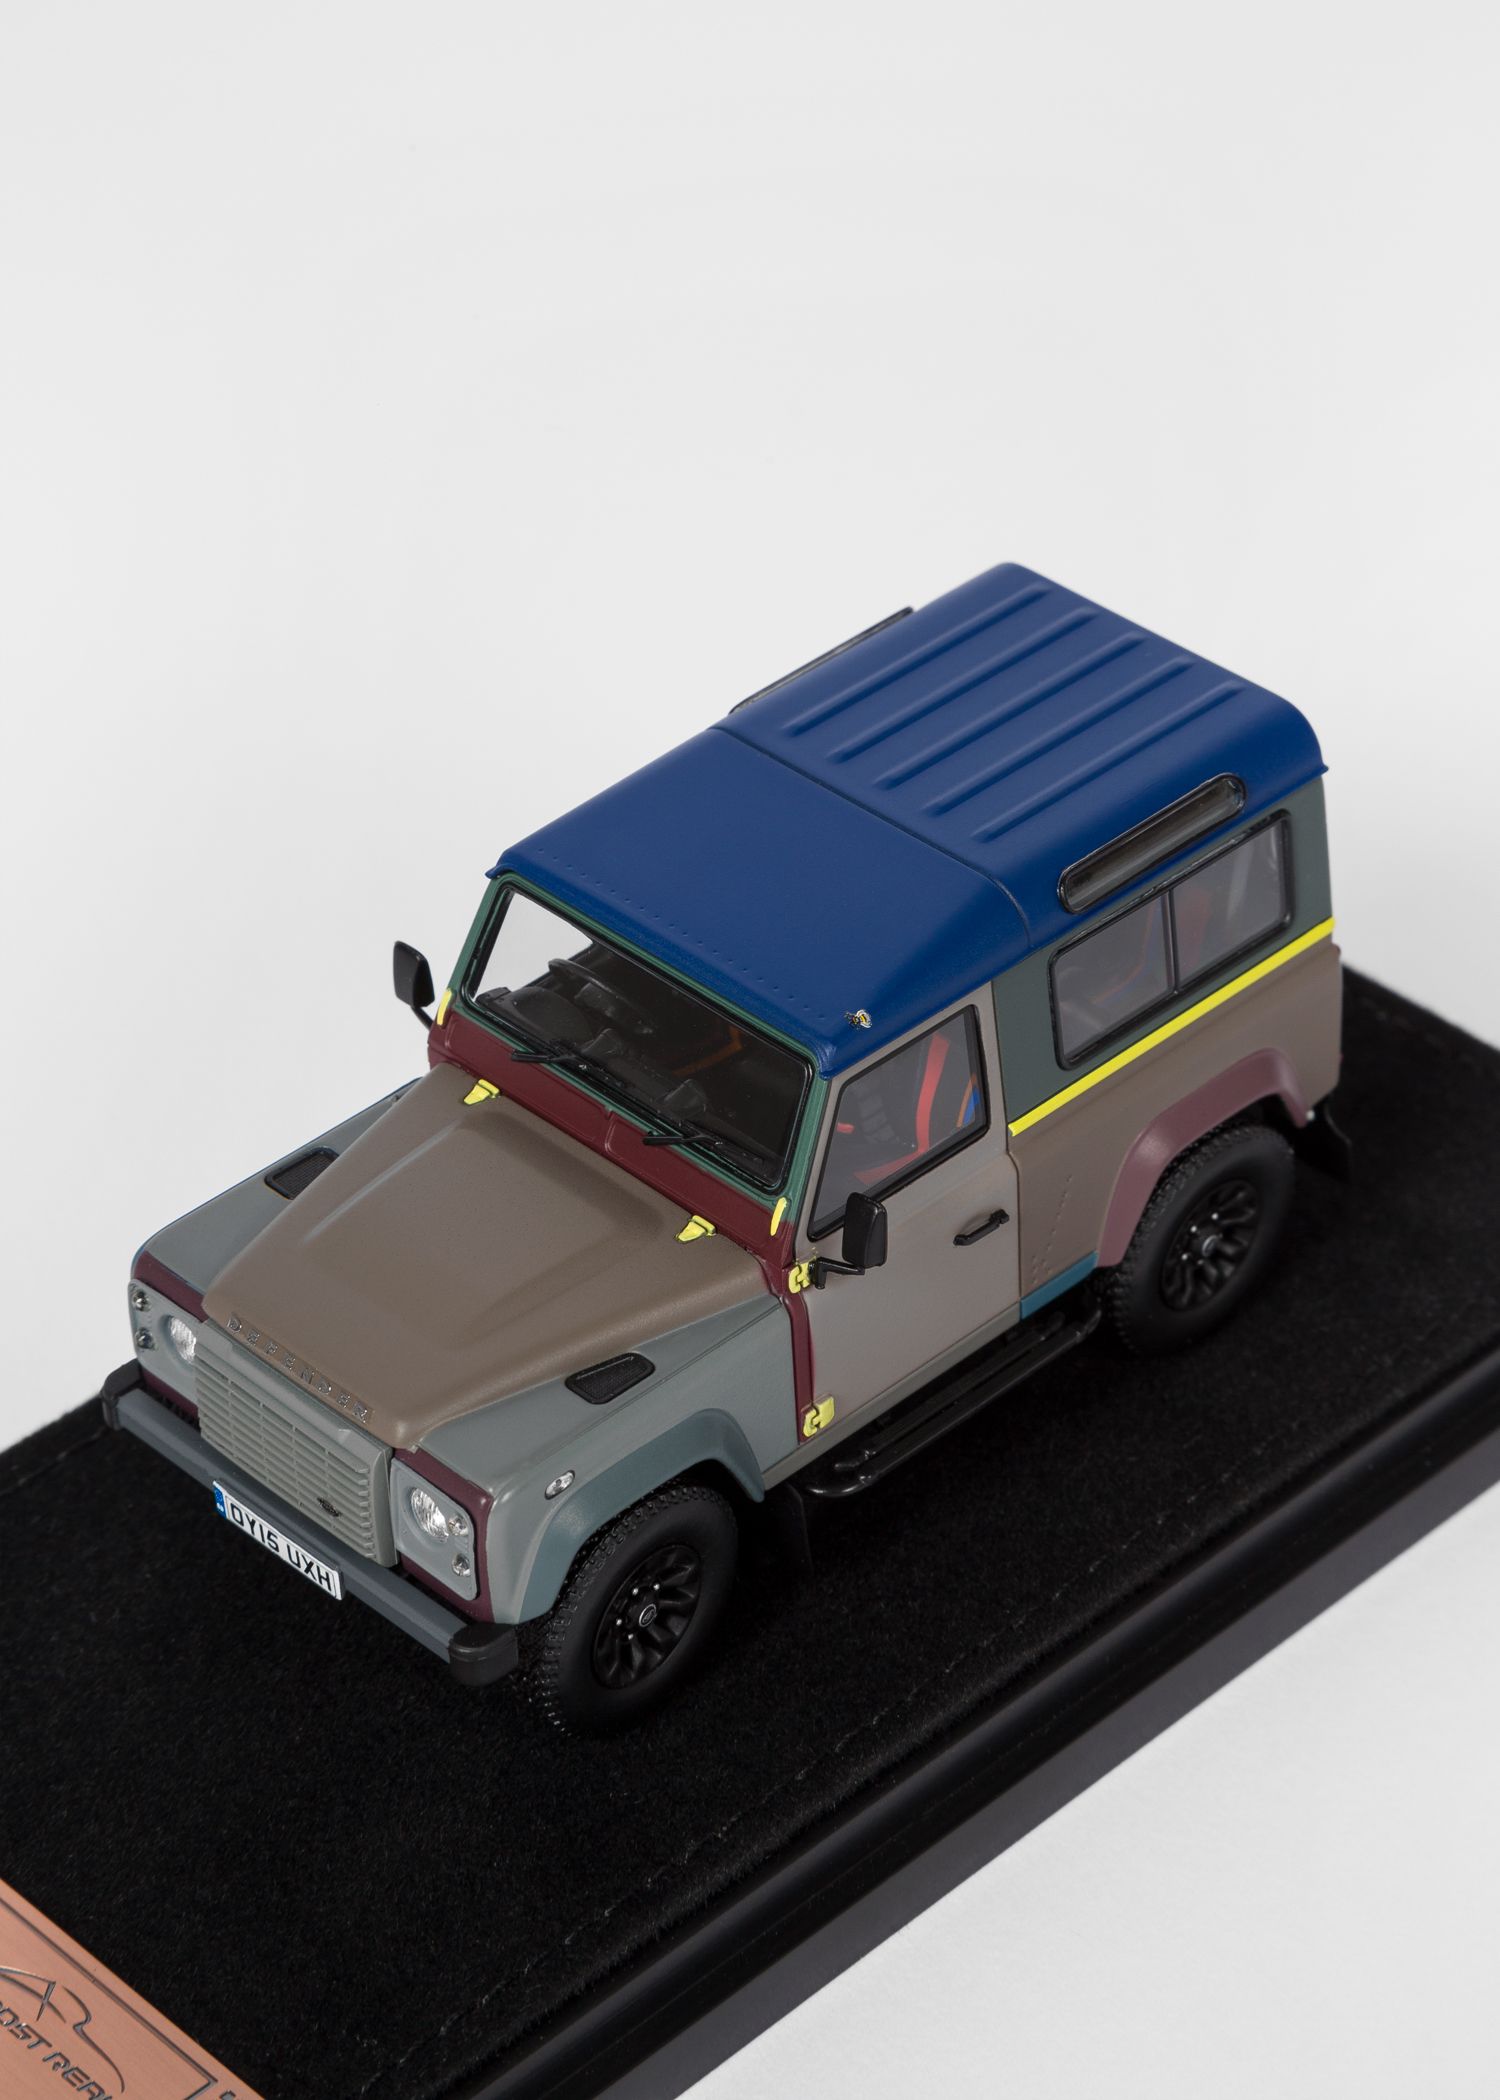 Paul Smith Land Rover Defender 90 Almost Real 1.43 Diecast Edition 2015 410214 for sale online